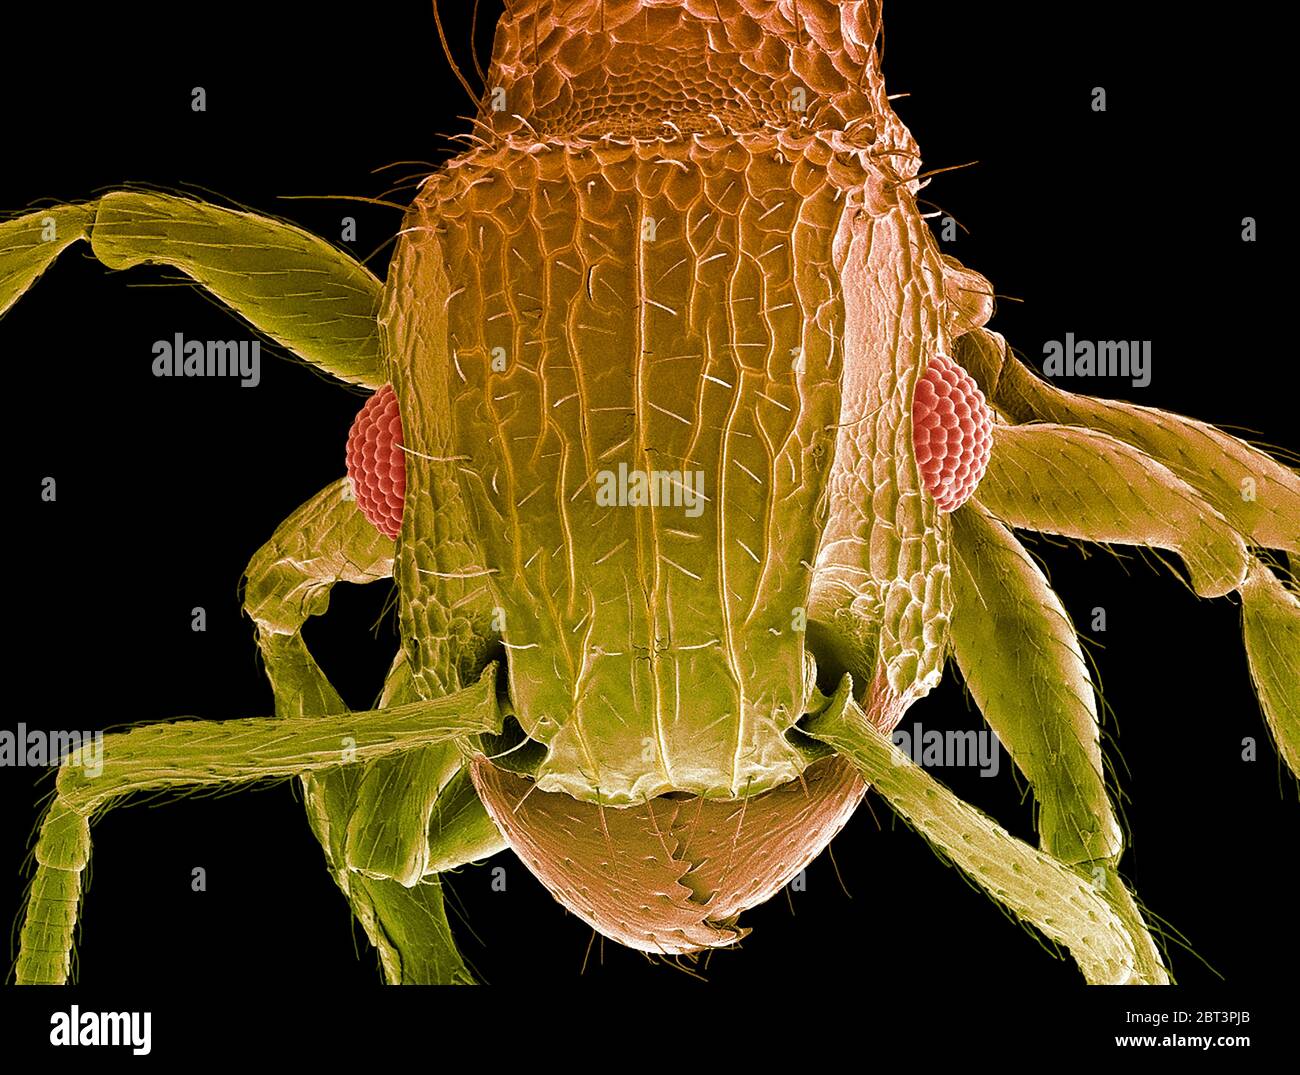 Ant head. Coloured scanning electron micrograph (SEM) of the head of an ant (family Formicidae). showing its large compound eyes (red) and jaws. Magnification: x50 when printed 10 centimetres wide. Stock Photo